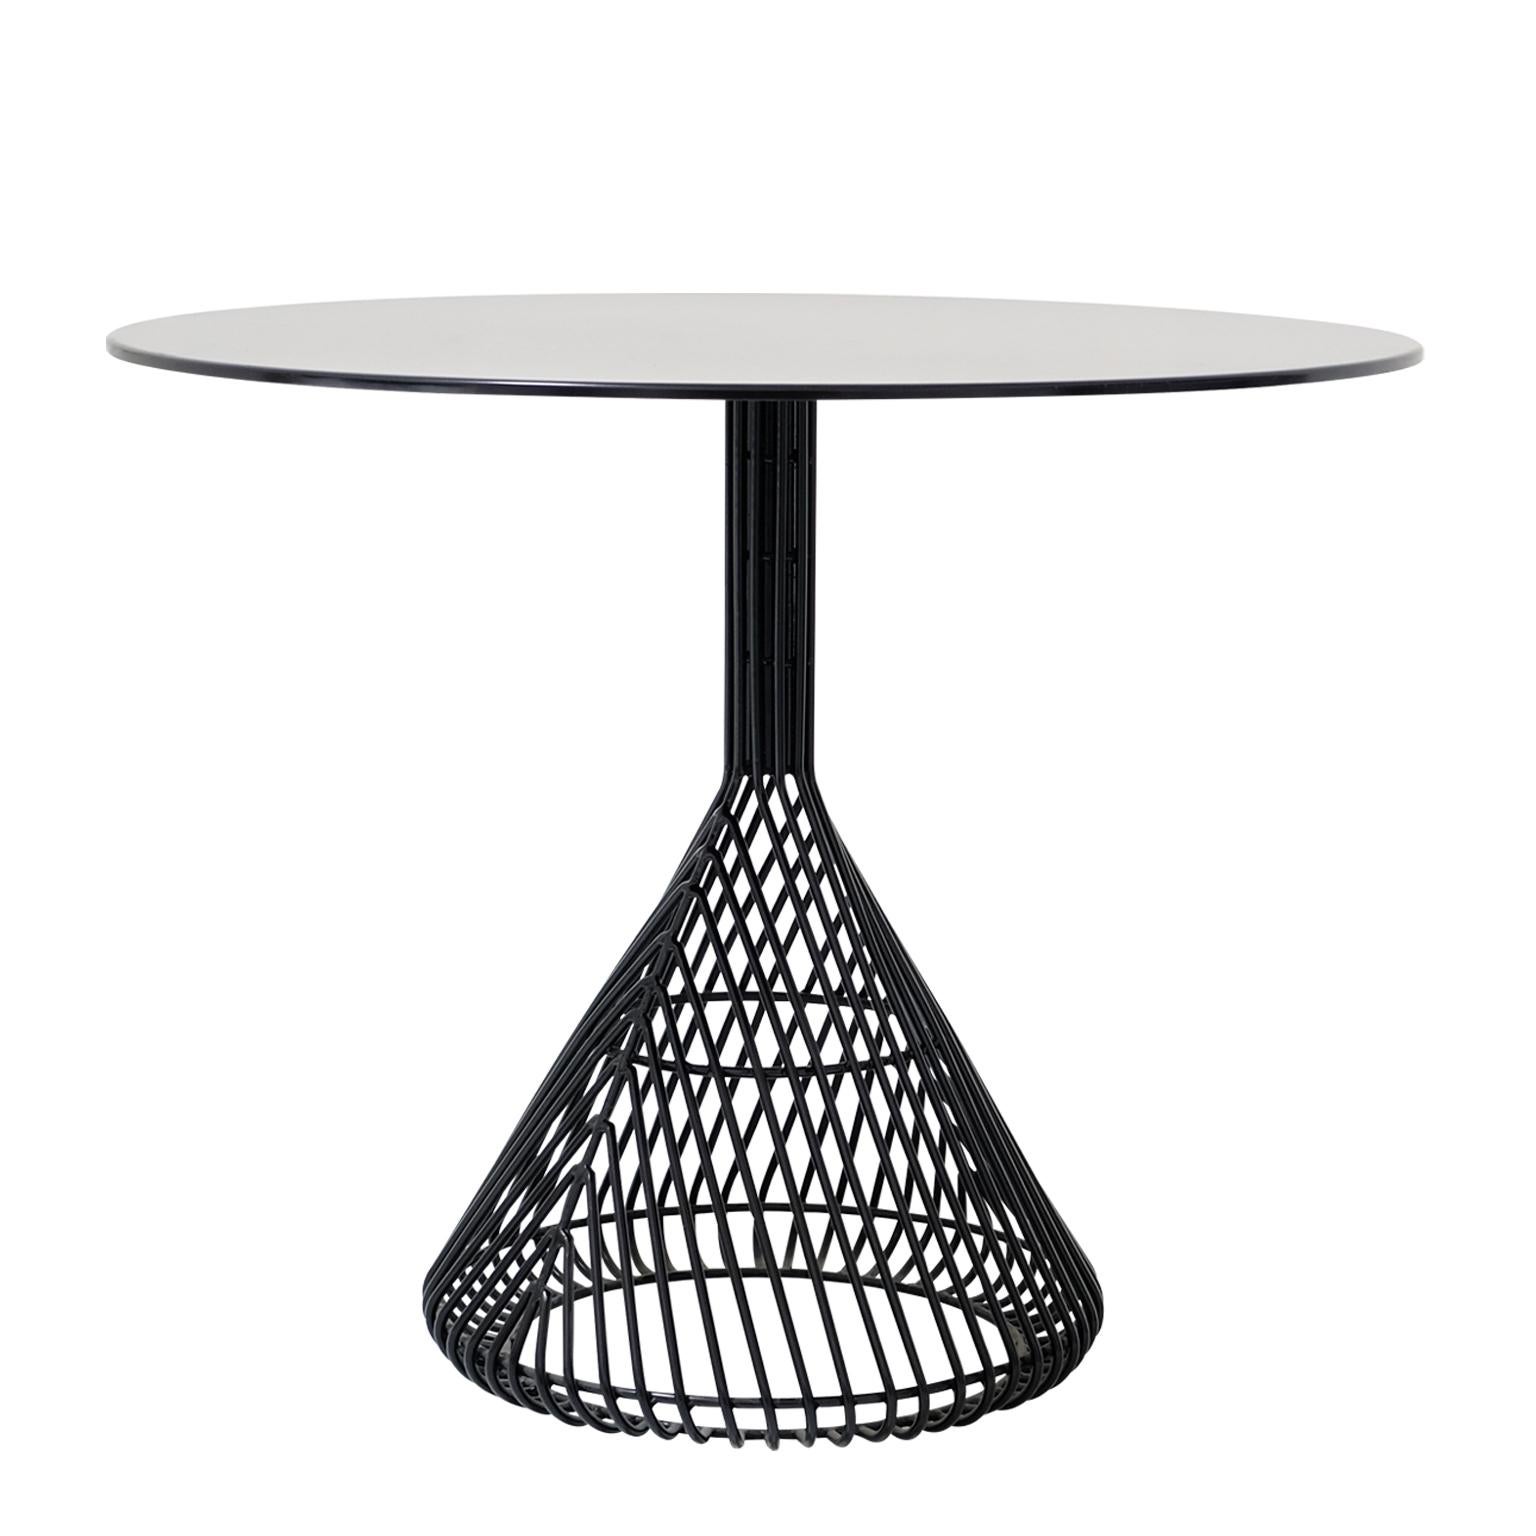 The Bistro table by Bend Goods is everything you could possibly want from a casual dining option. This sleek and slender table is the perfect piece to make a big statement in any dining space of any size. It's galvanized wire base provides a sturdy